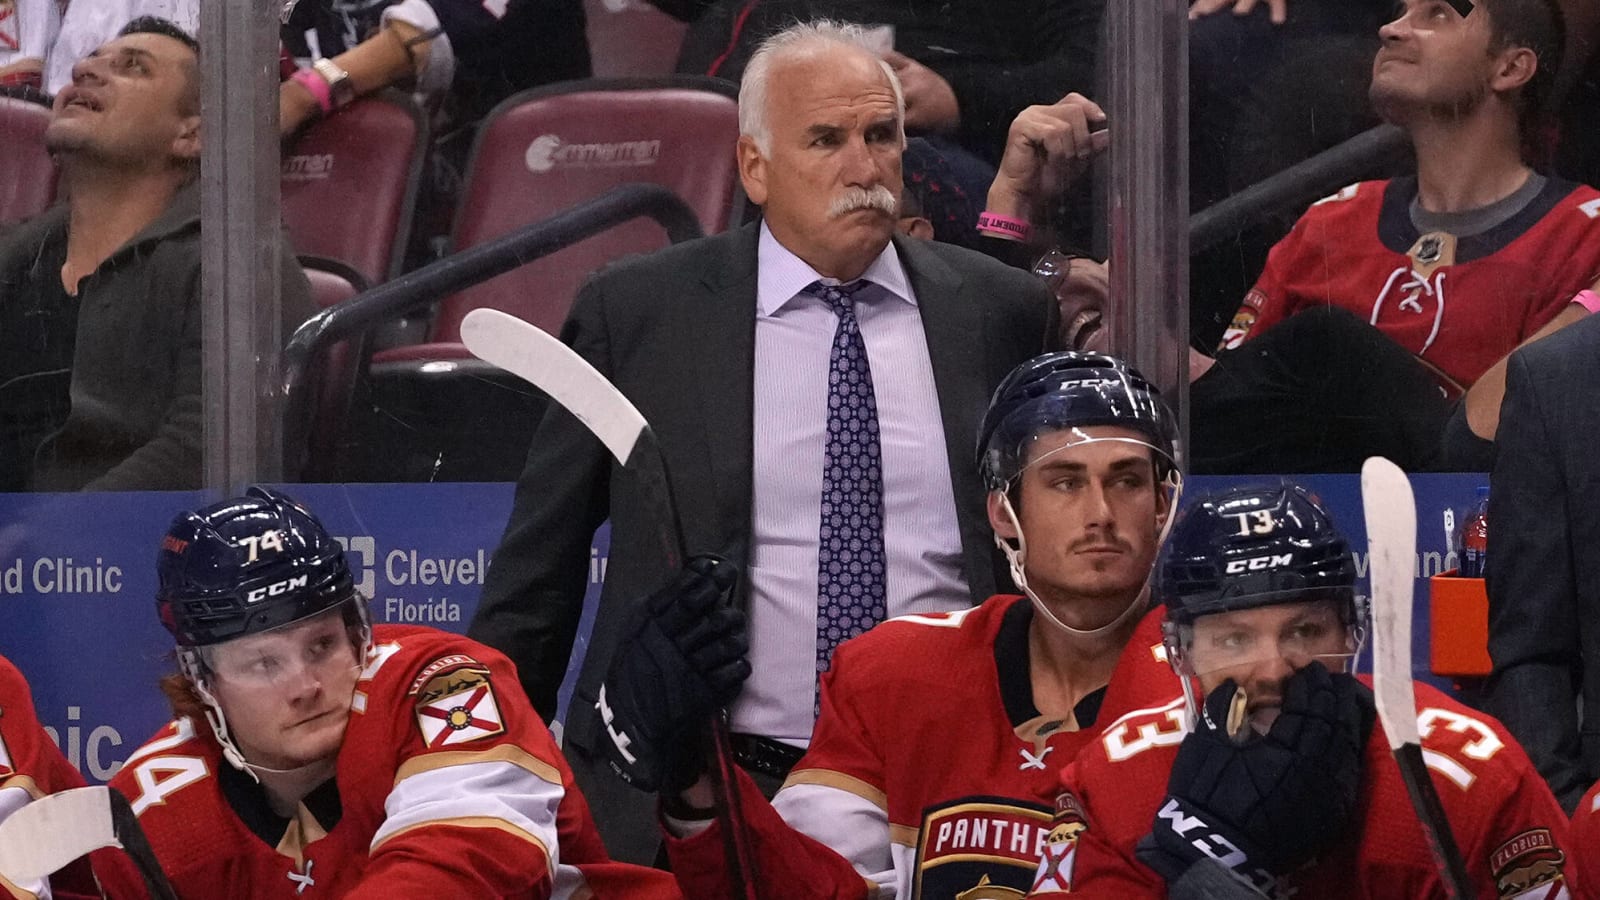 Even with the Hawks scandal, Joel Quenneville wants to return to the NHL